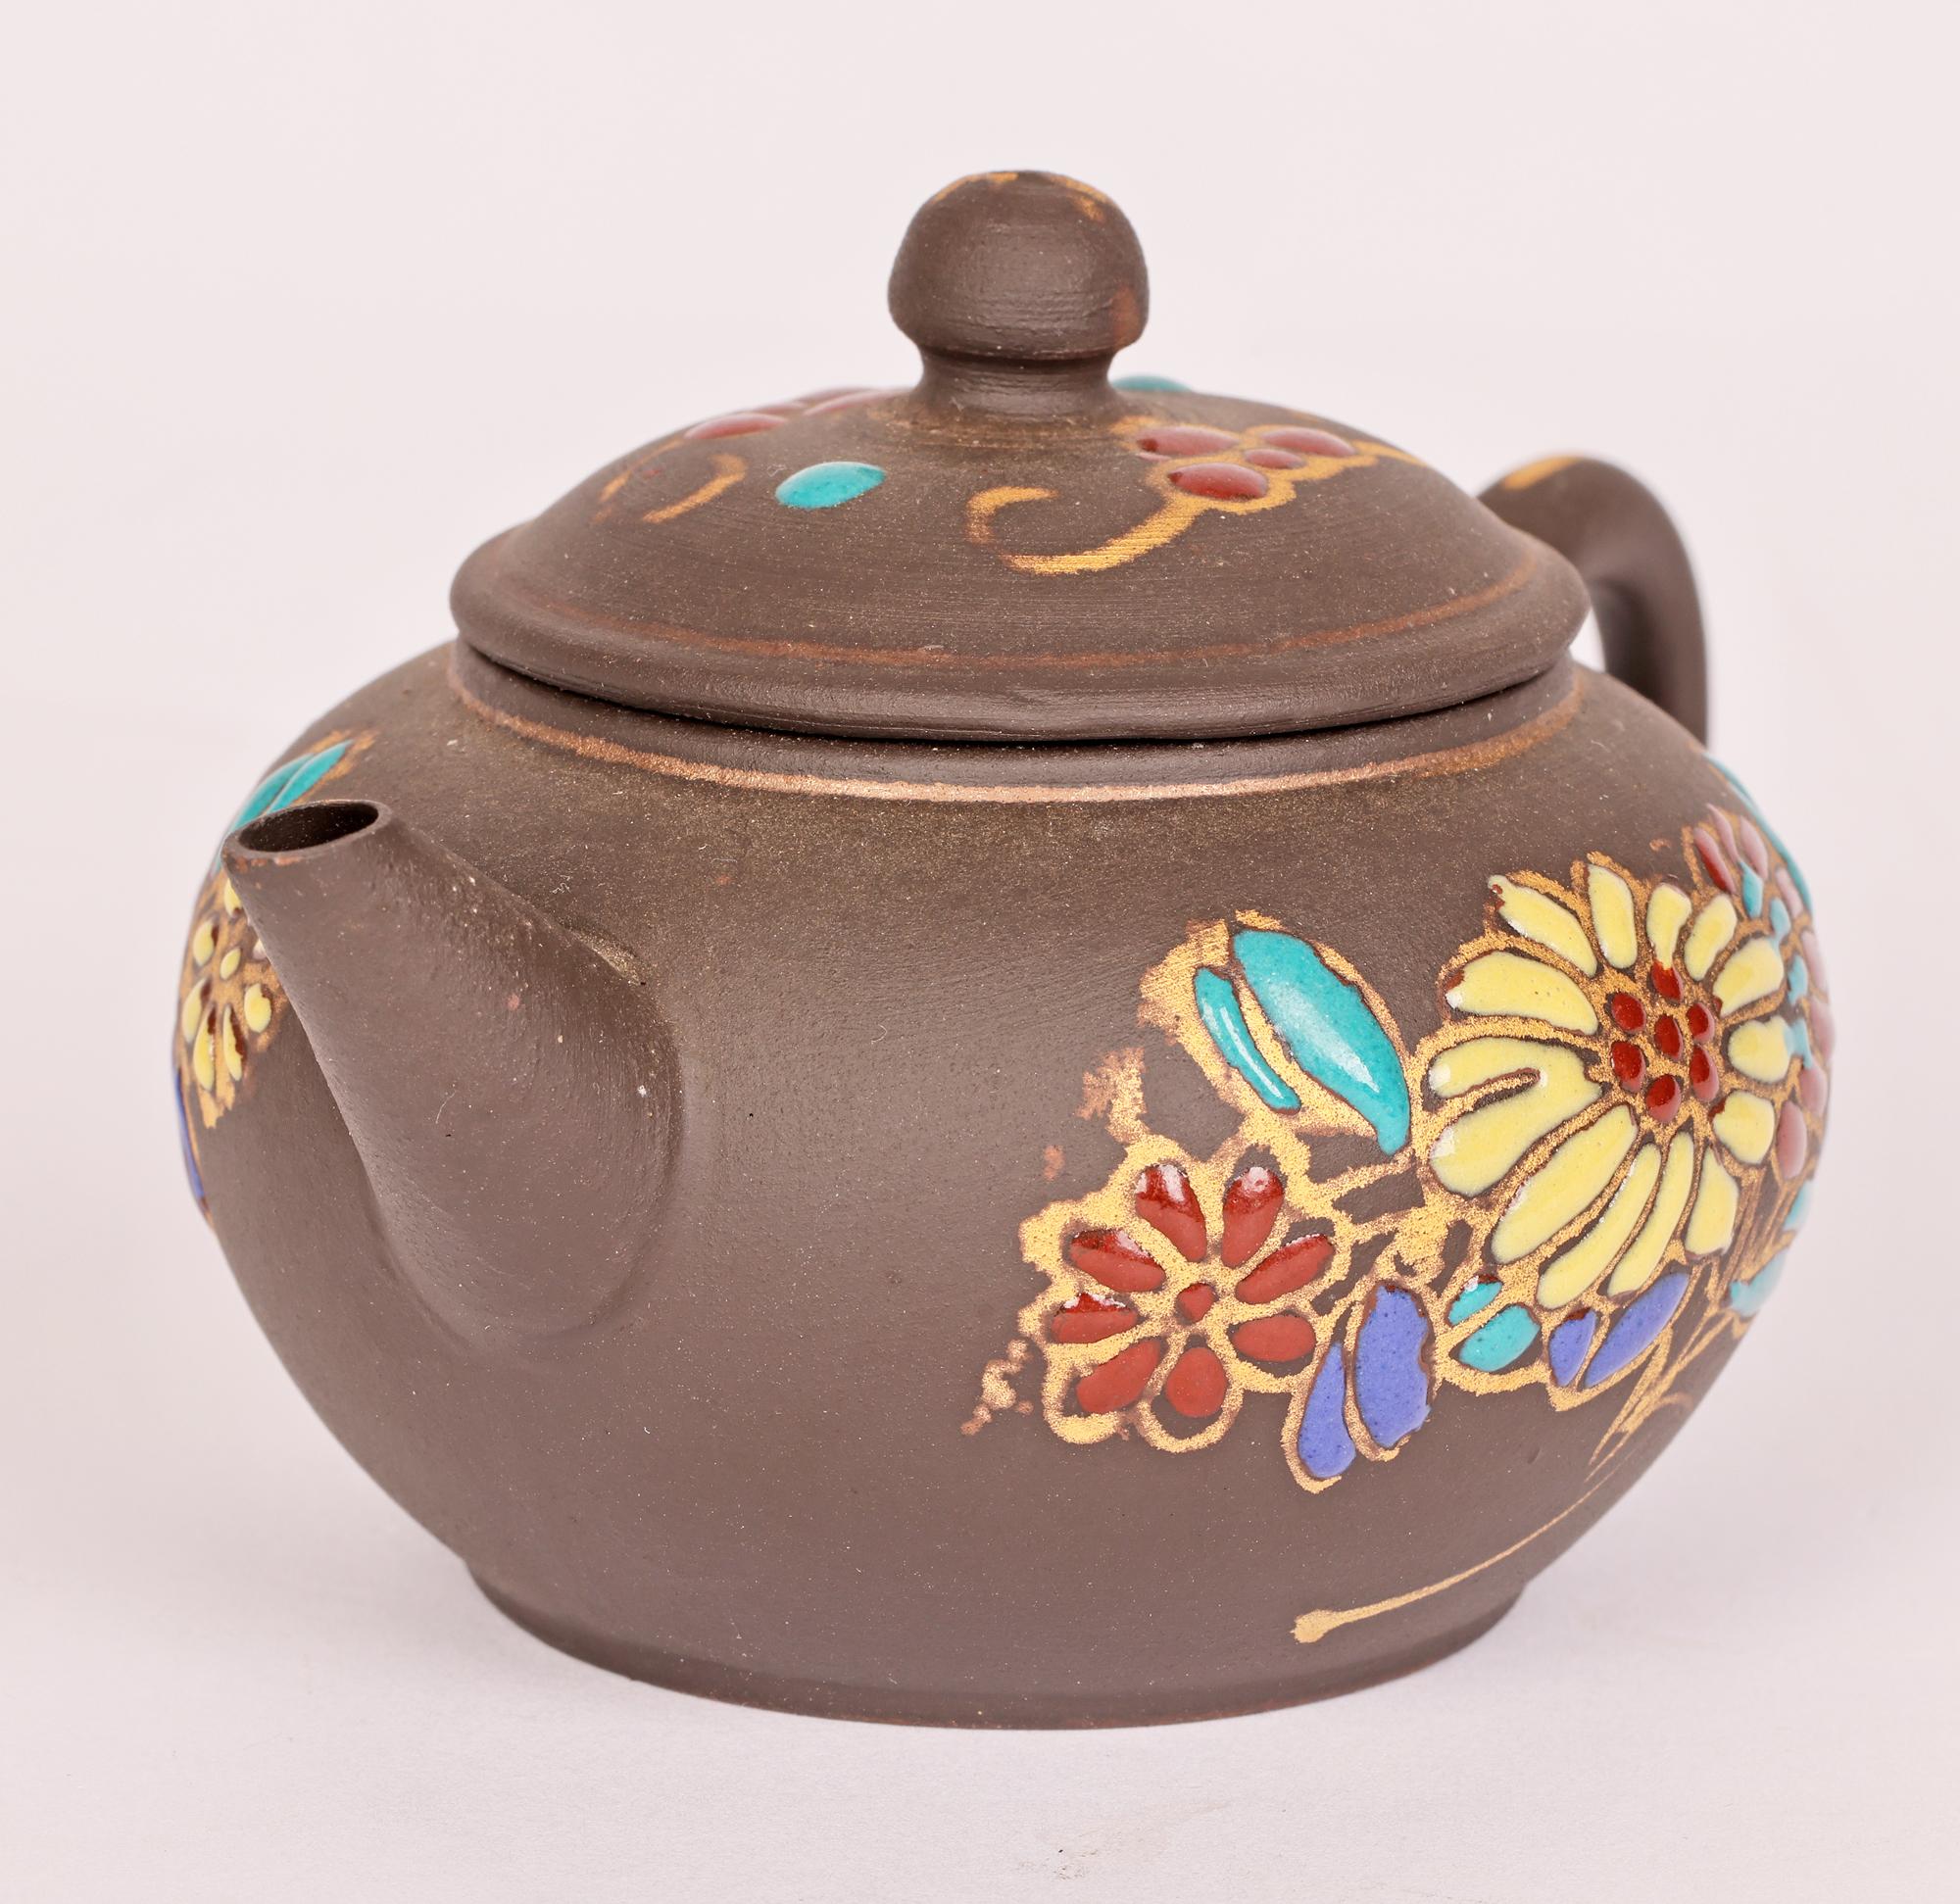 Pottery Chinese Miniature Yixing Teapot with Applied Floral Enamel Designs  For Sale